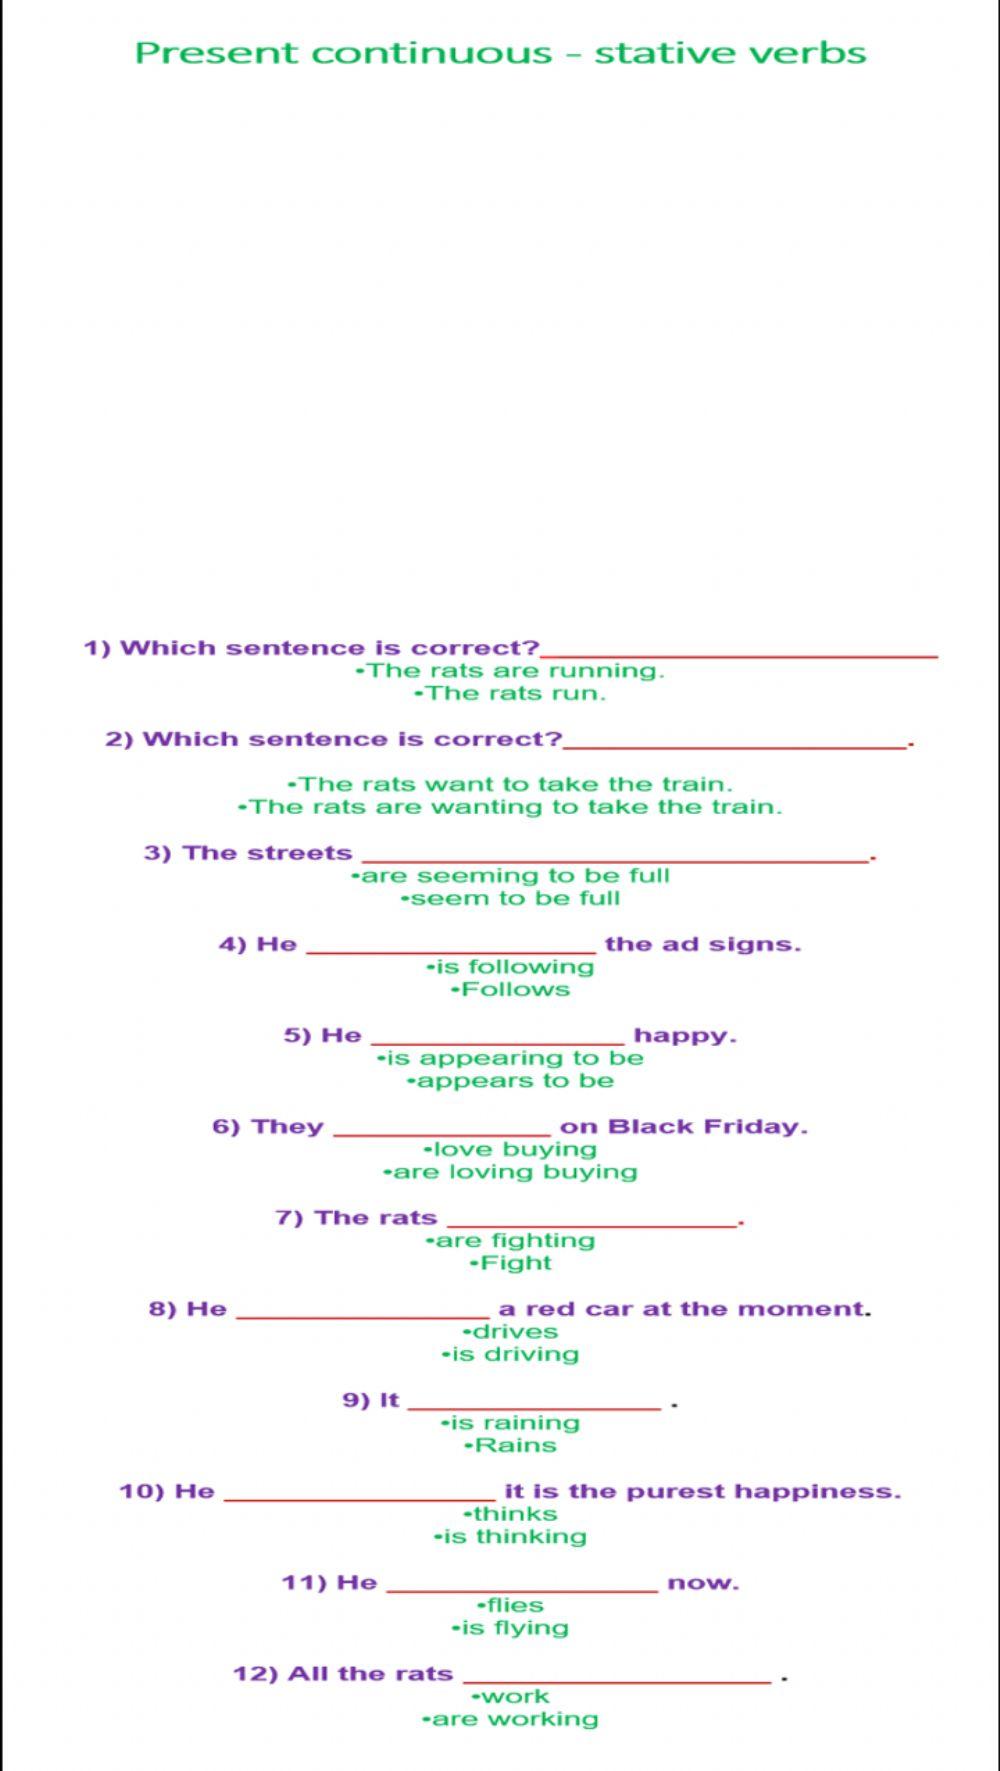 Present continuous - stative verbs